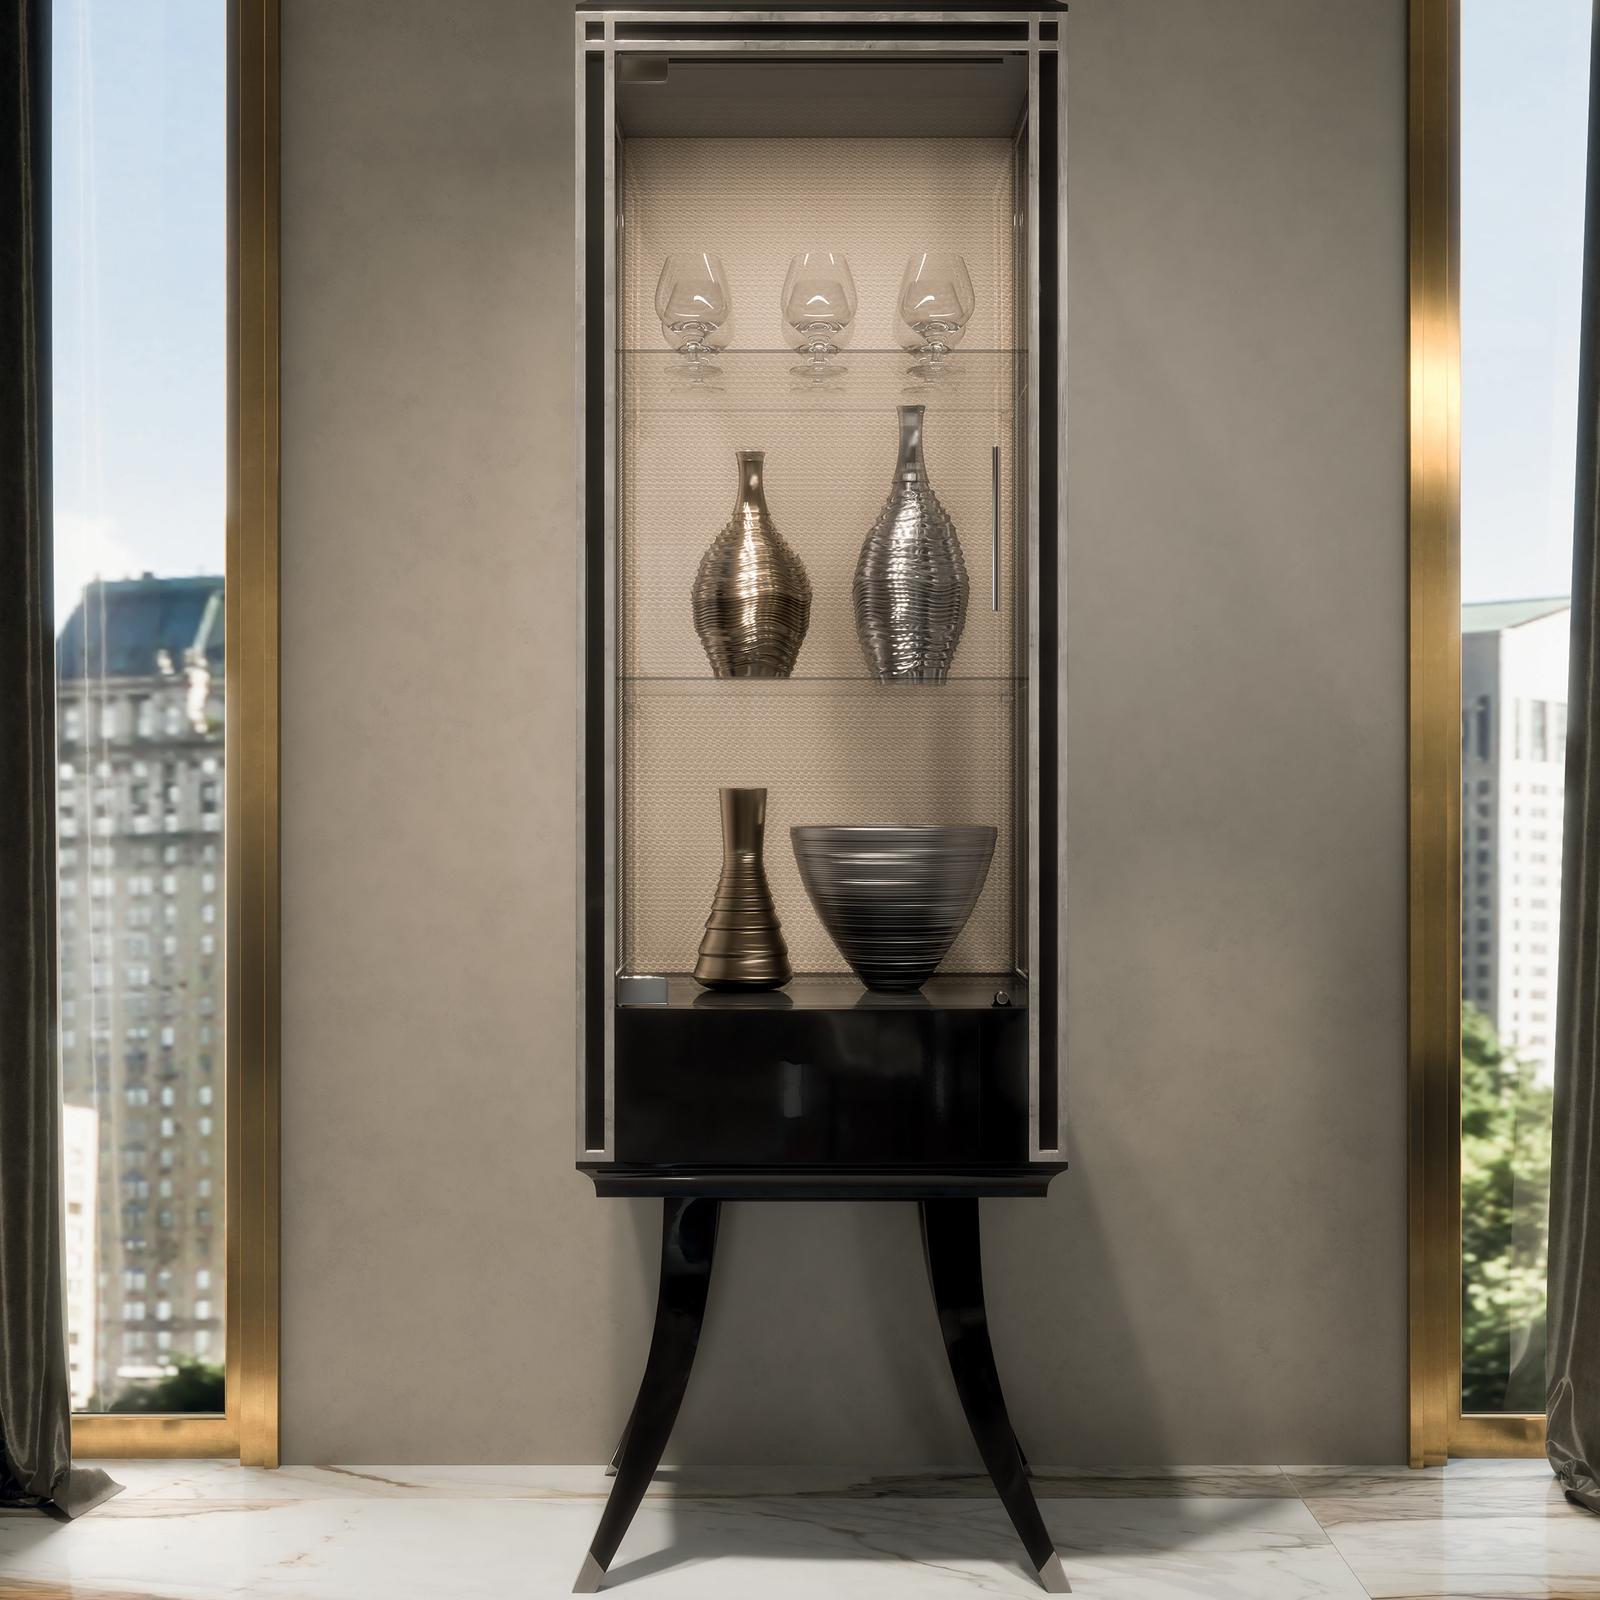 Featuring a splendid polished finish with silver leaf detail, this remarkable Cabinet is a furnishing piece of refined quality. This spectacular Cabinet features 1 door and 1 drawer with push pull blumotion, tempered glasses and led lights. Crafted